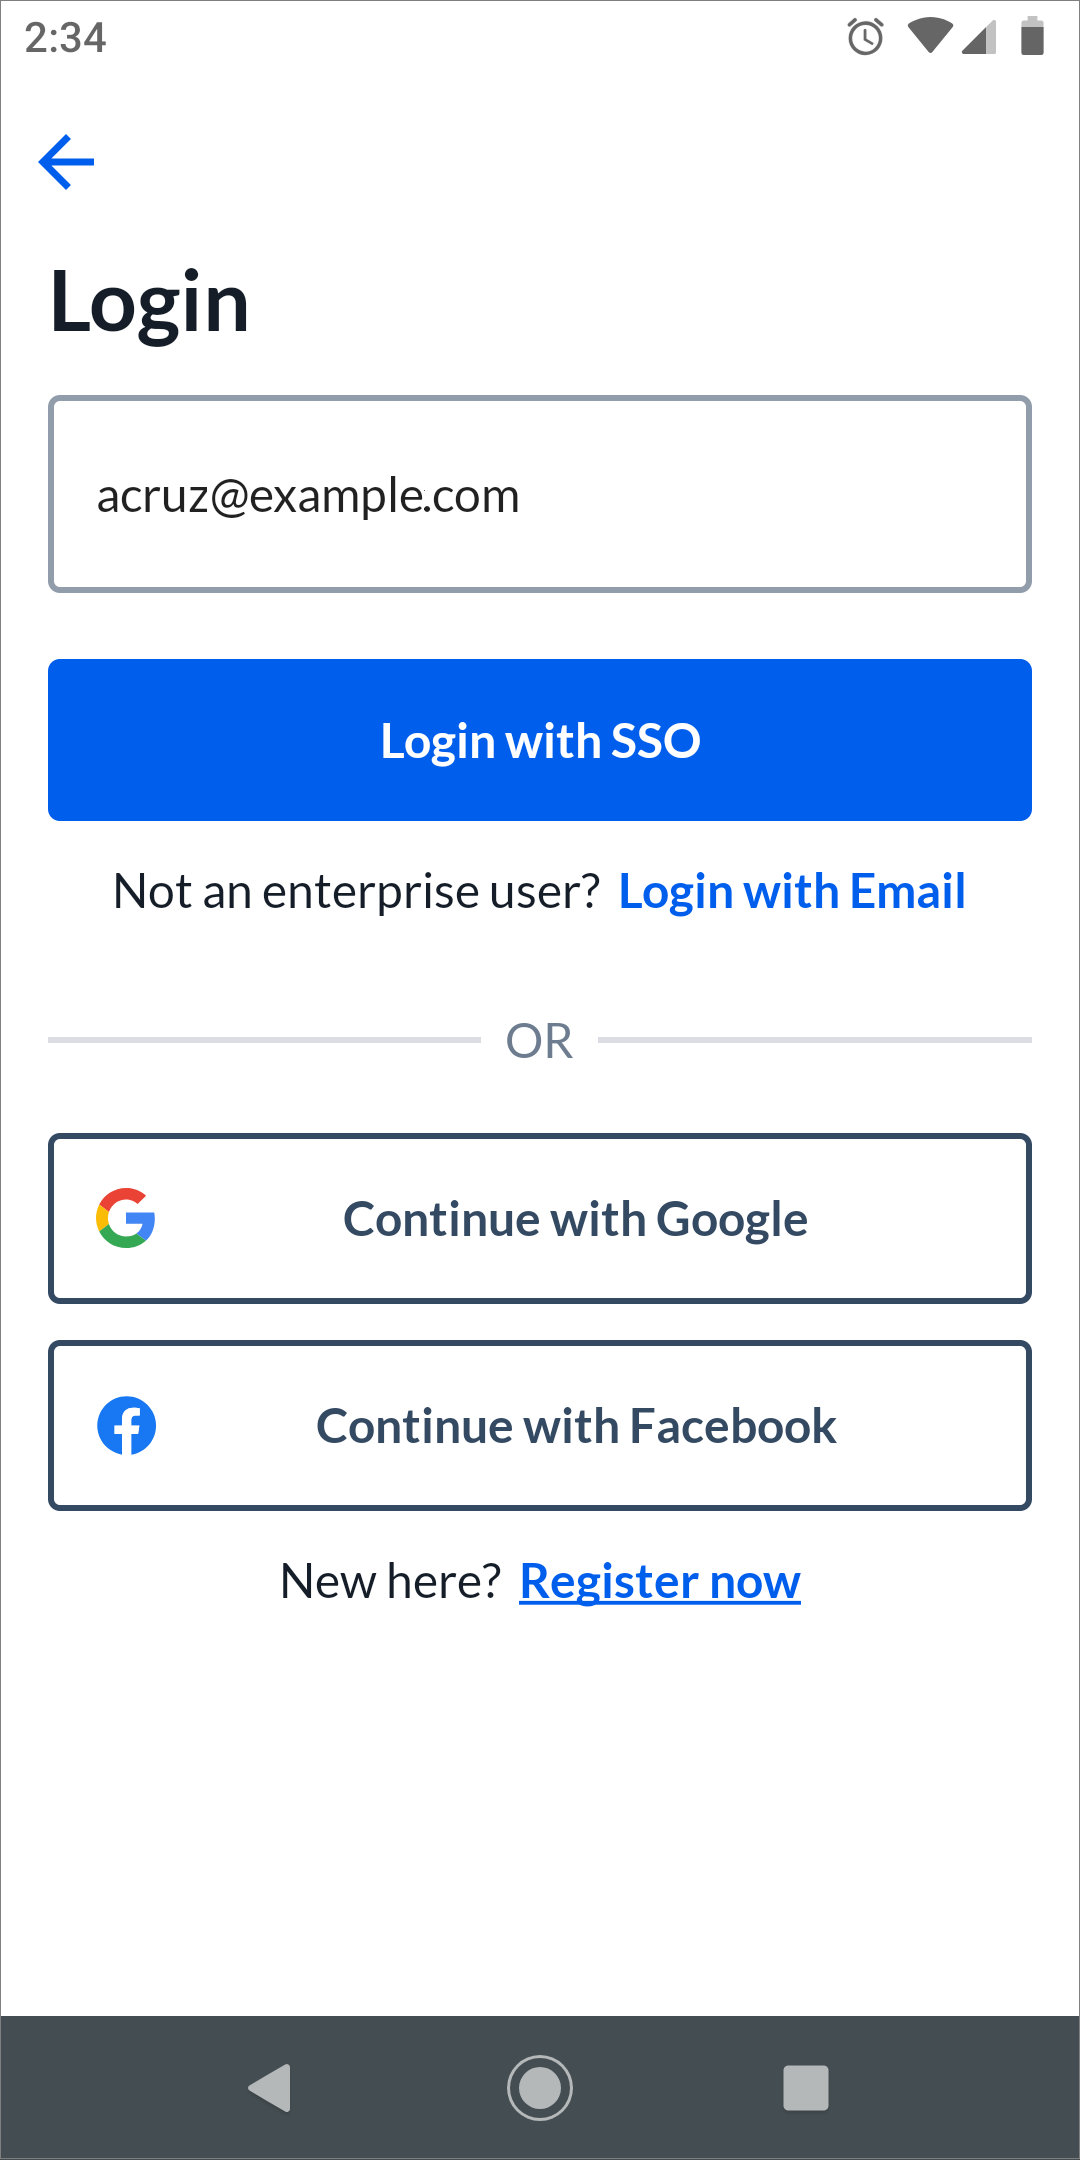 login_with_sso_mobile.png